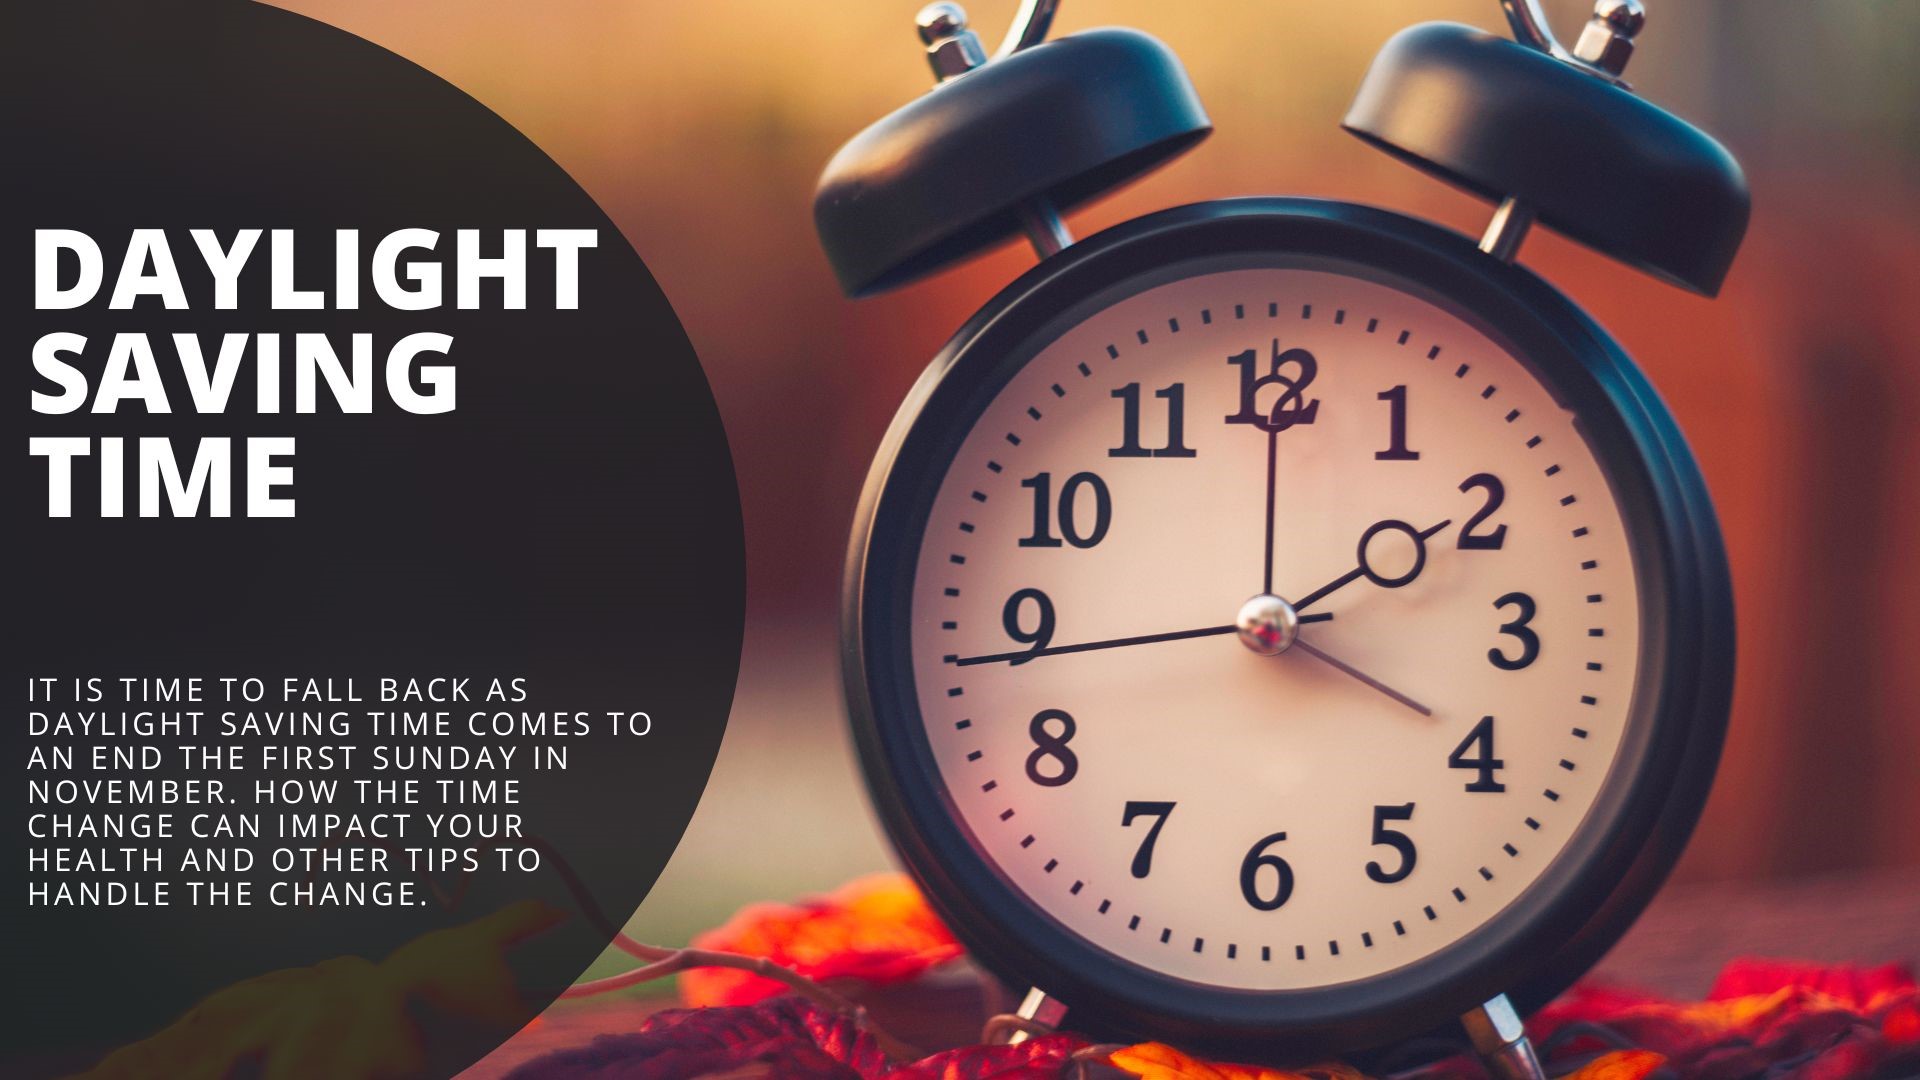 It is time to fall back as daylight saving time comes to an end the first Sunday in November. How the time change can impact your health and more.